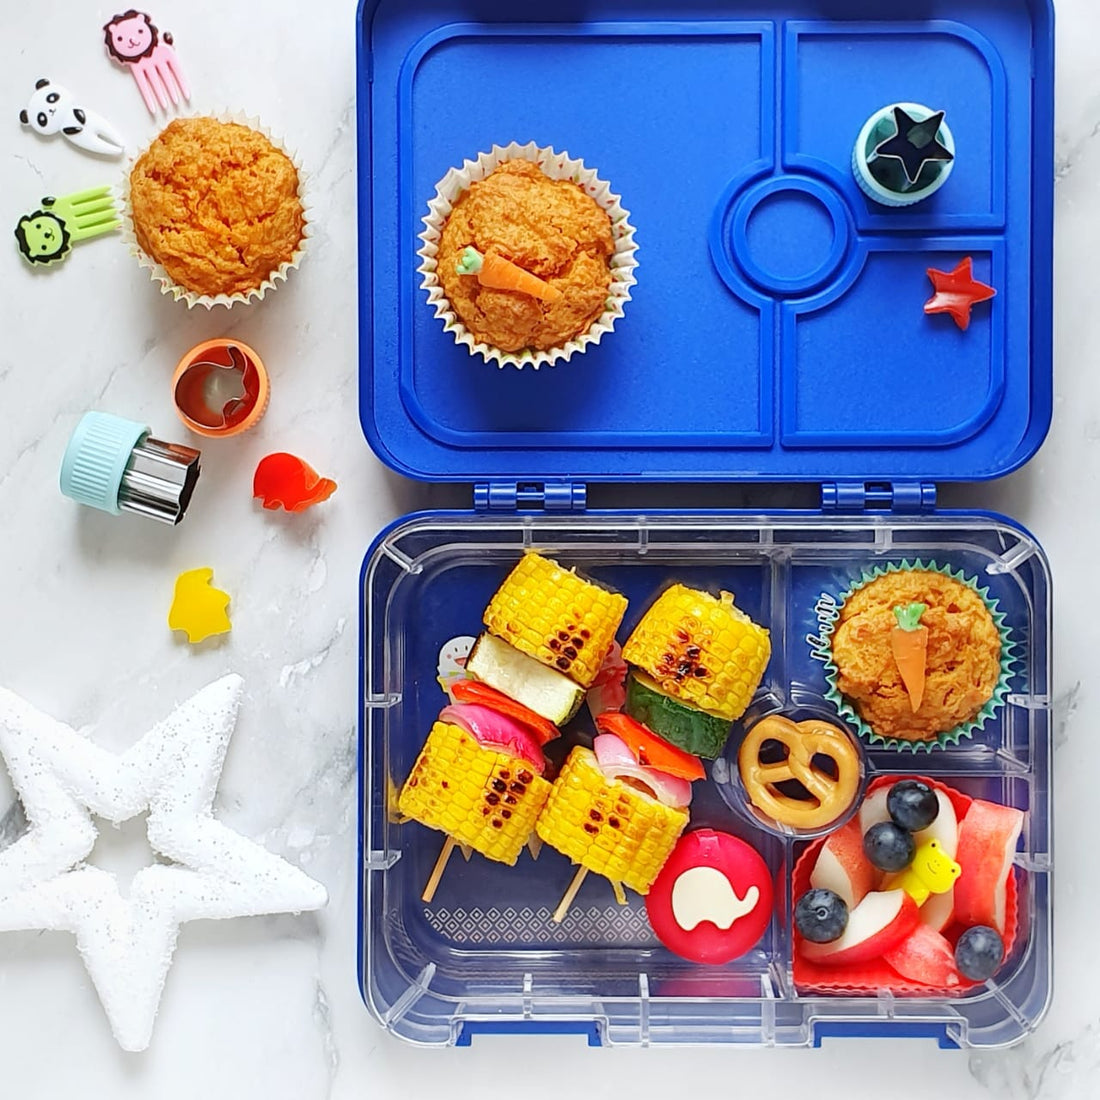 Carrot cupcakes with vitn on cob in skewers- Truck Lunchbox 4 compartments